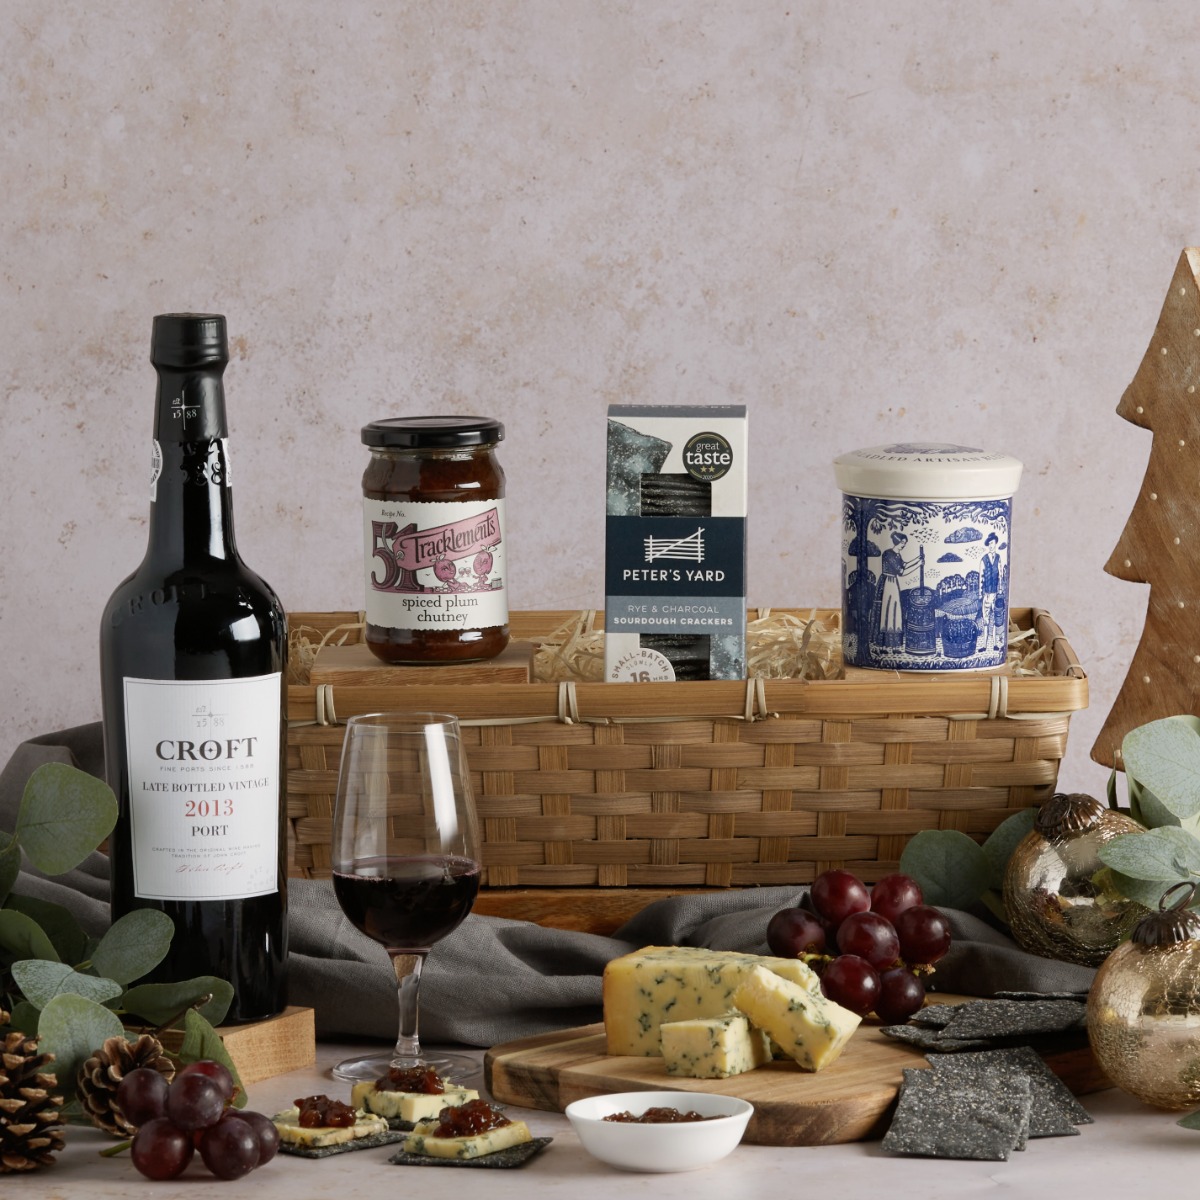 Luxury Port and Stilton Hamper with contents on display and Christmas decorations